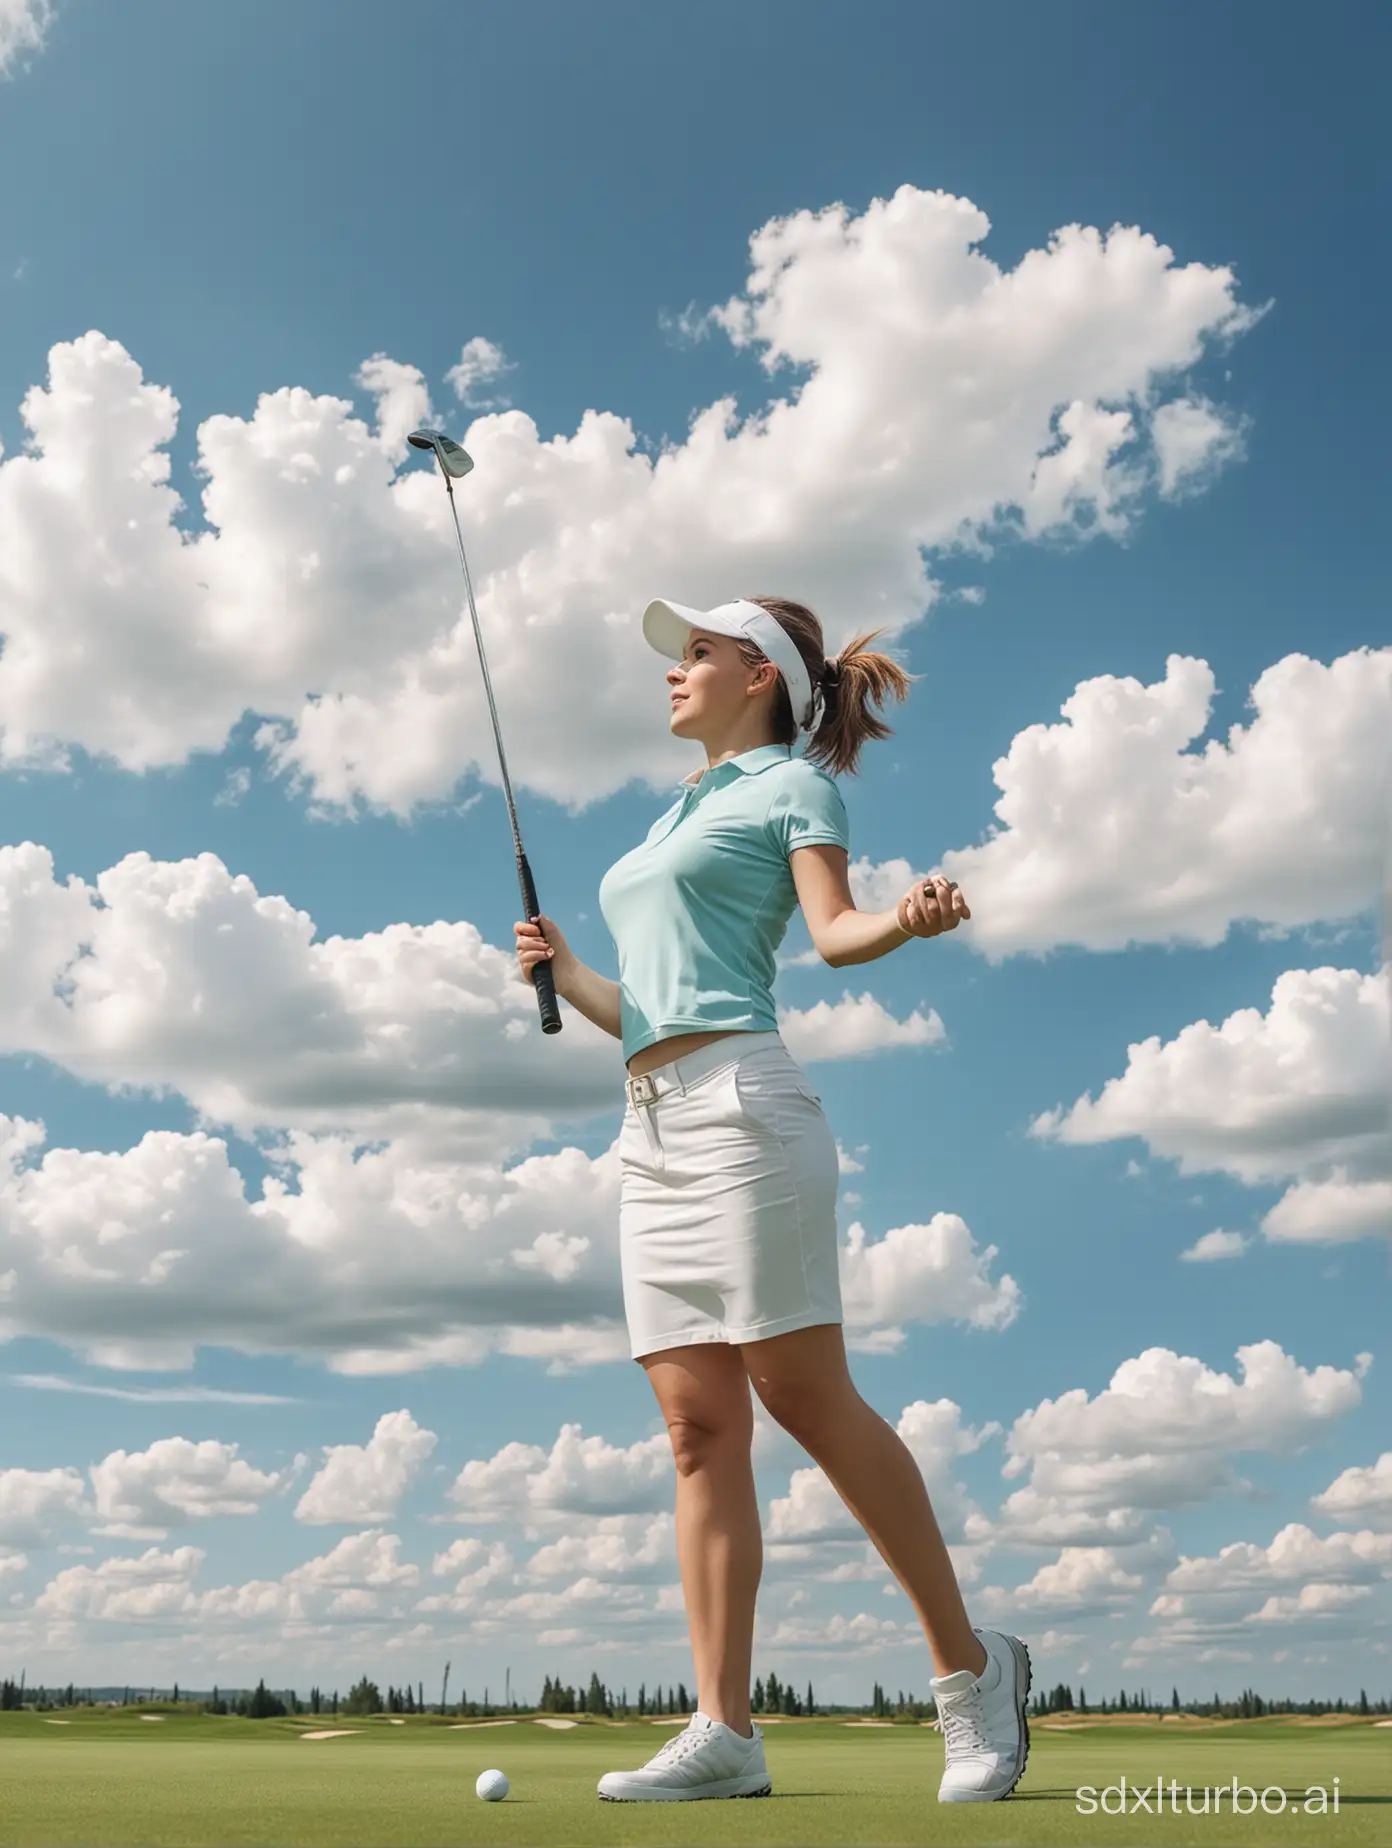 Under the blue sky and white clouds, a woman is playing golf and saying hello.